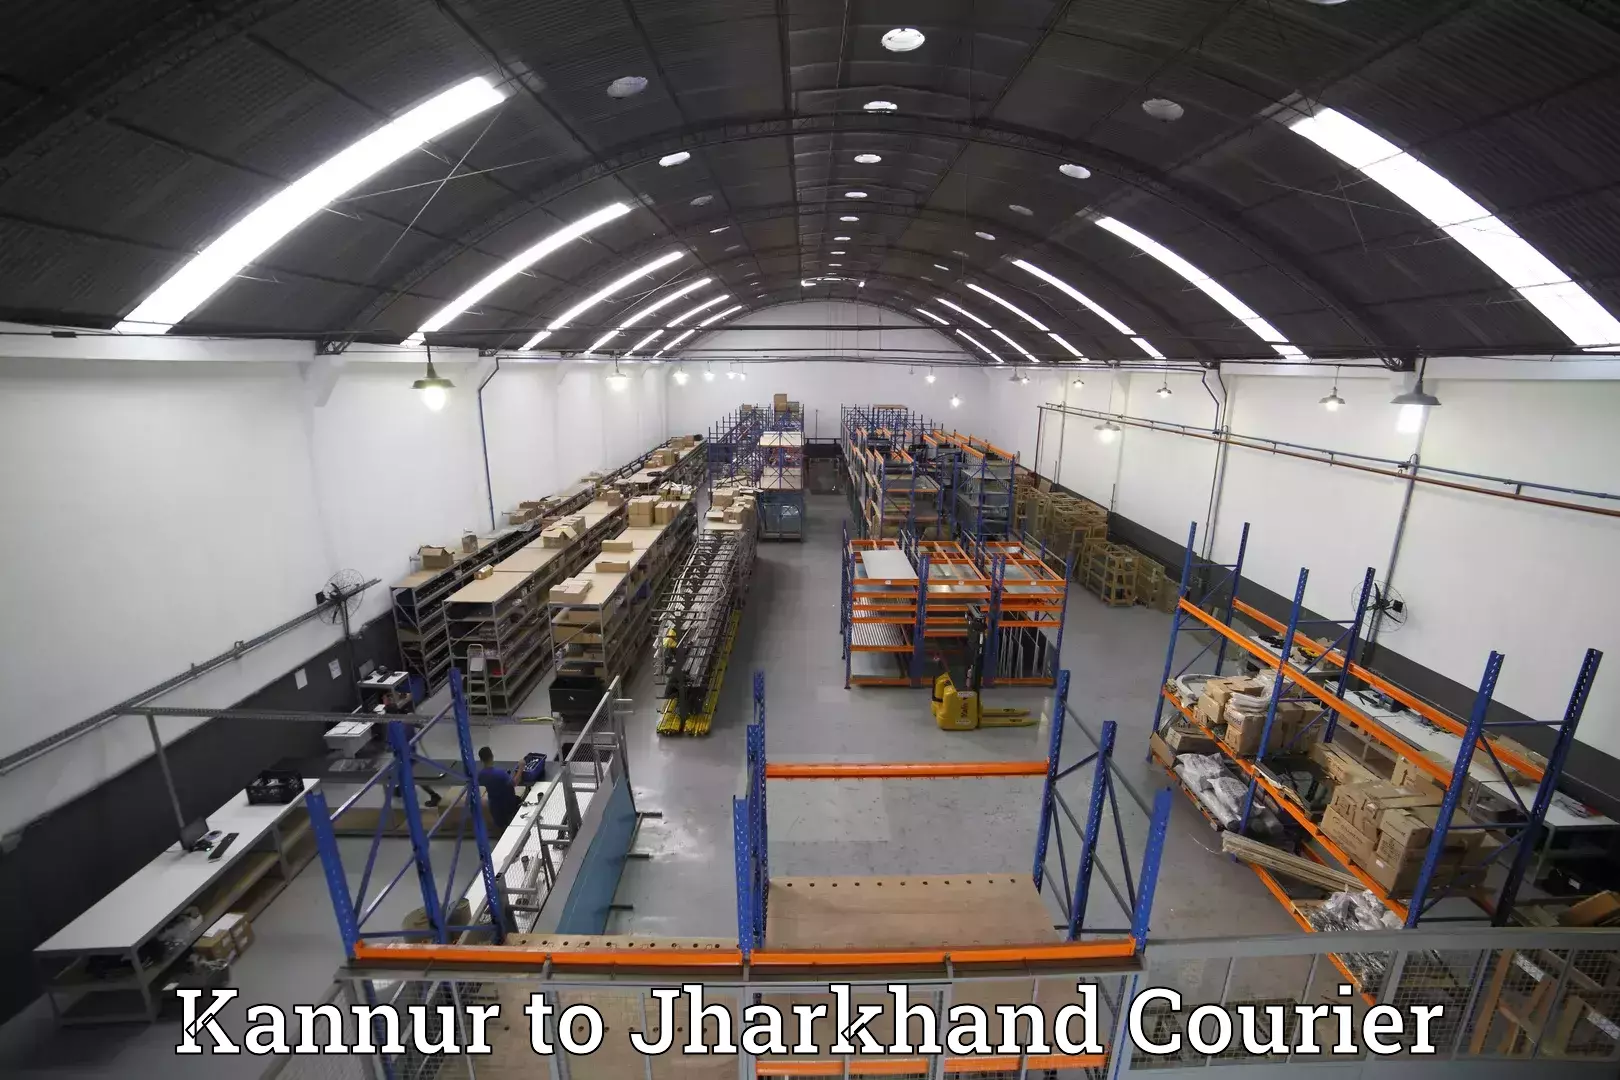 Luggage shipping planner Kannur to Jharkhand